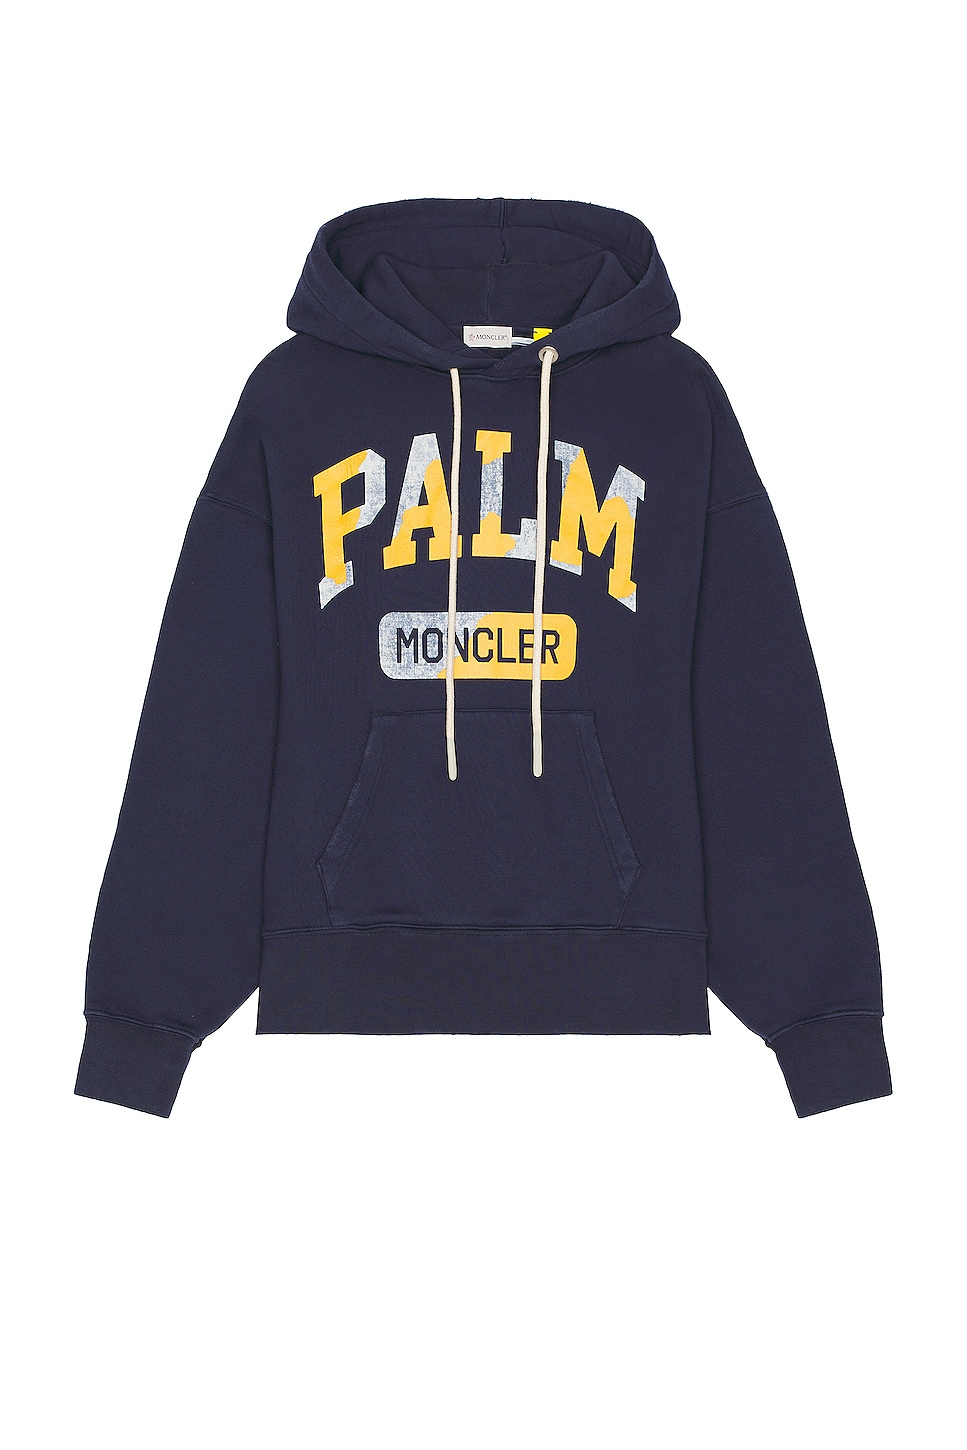 Image 1 of Moncler Genius x Palm Angels Palm Hoodie in Blue